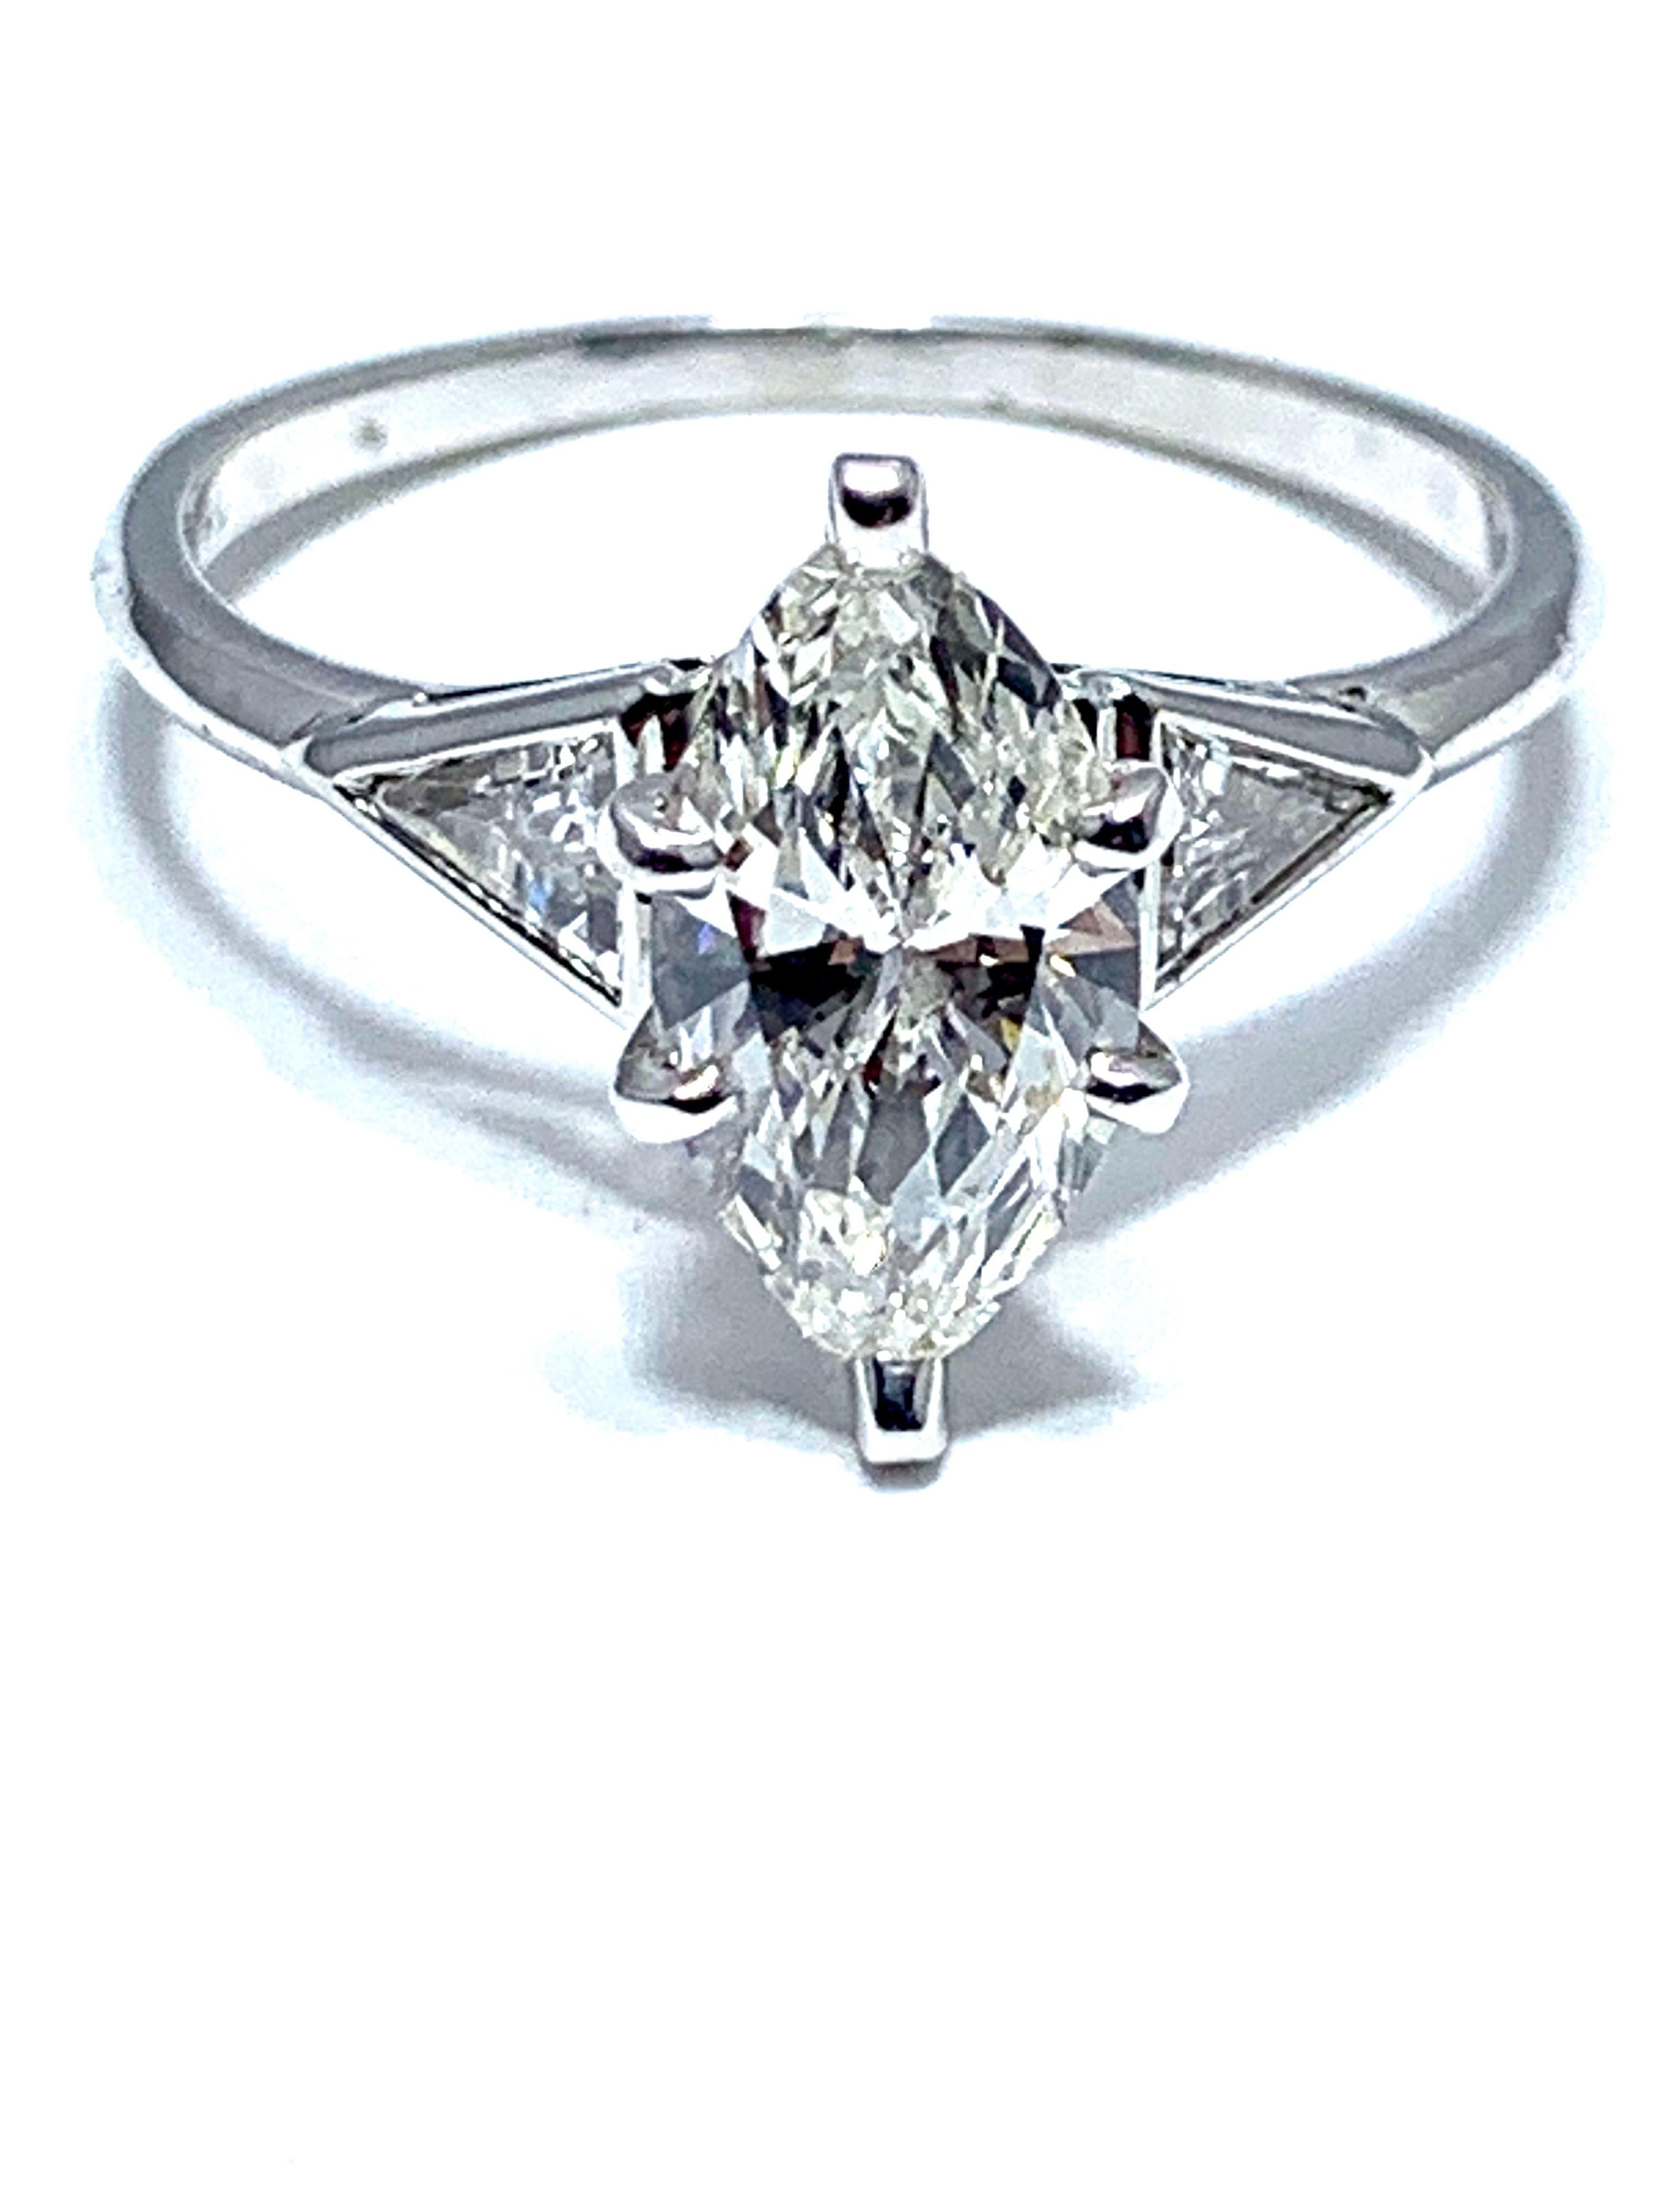 A beautiful 1.16 carat marquise and trilliant cut diamond engagement ring.  The center marquise is set in a six prong platinum head, with two trilliant cut diamonds on each side, and a platinum shank.  The marquise is graded by GIA as F color, VS2